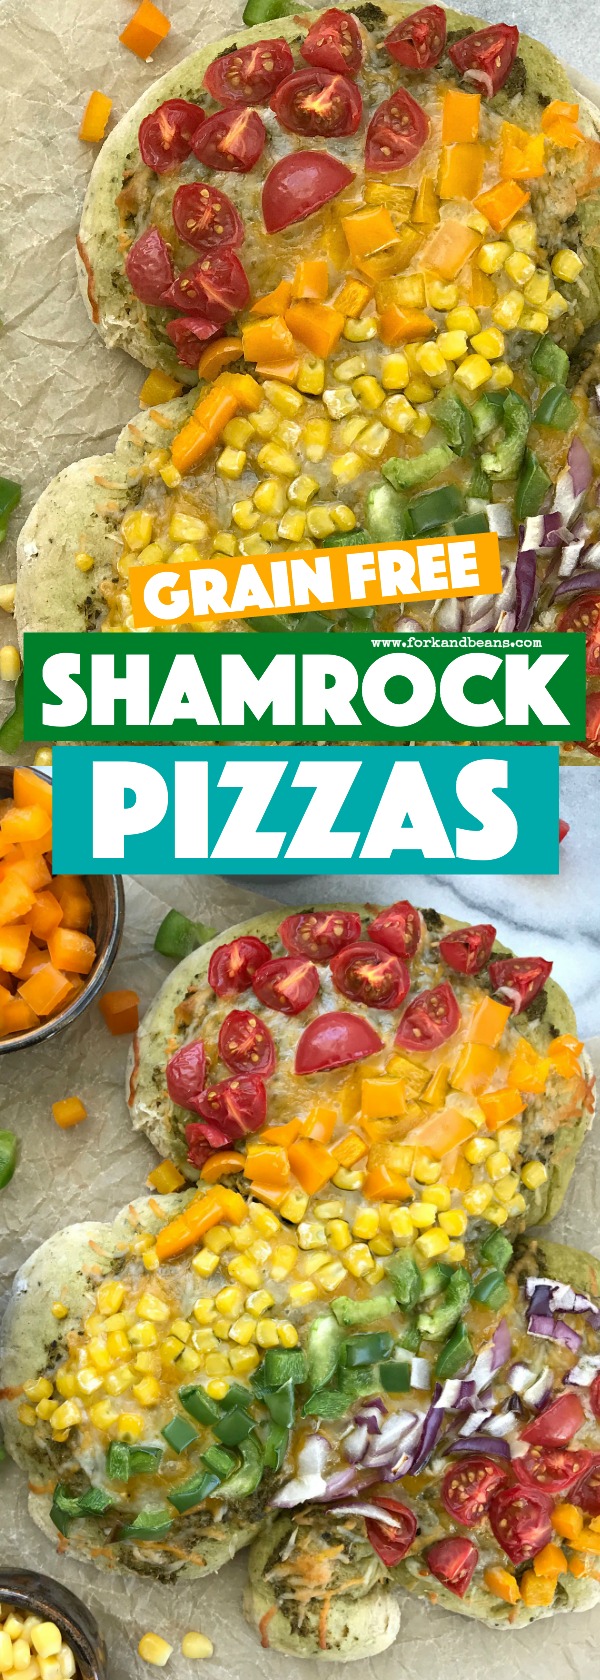 A marble slab with a shamrock pizza, topped with rainbow colored veggies